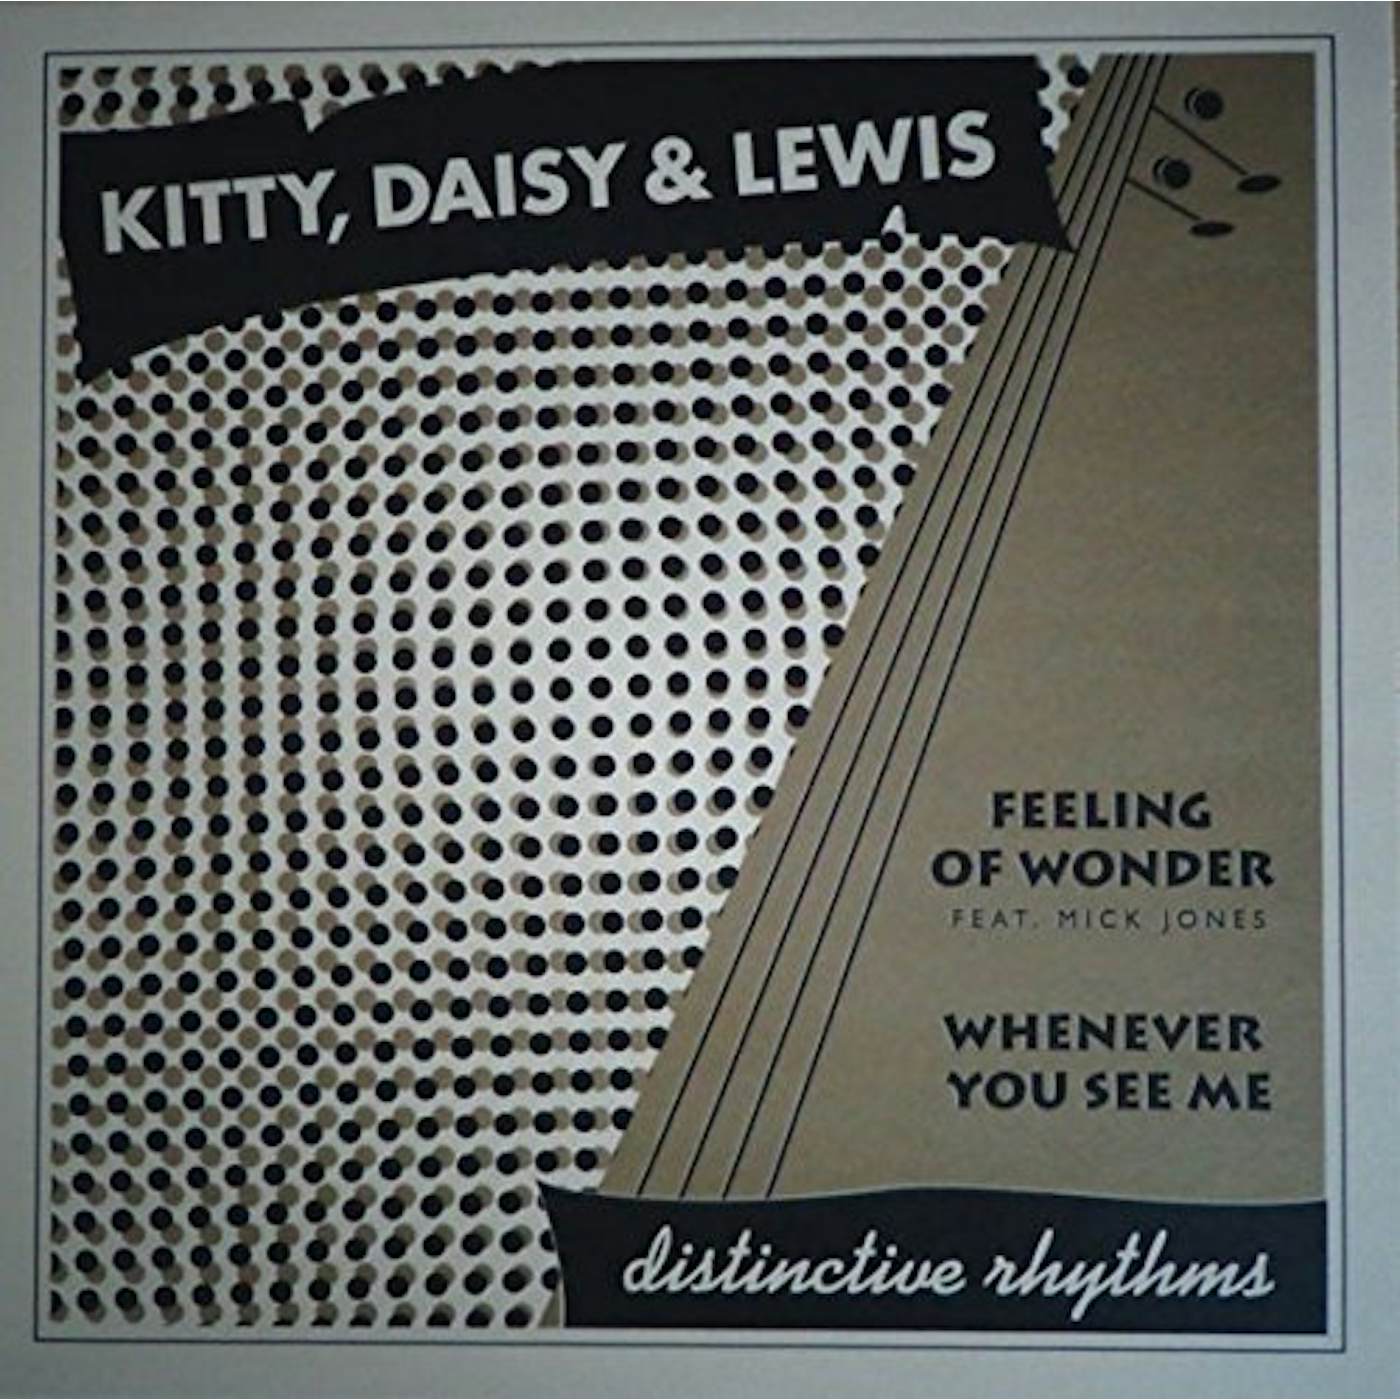 Kitty, Daisy & Lewis Whenever You See Me Vinyl Record